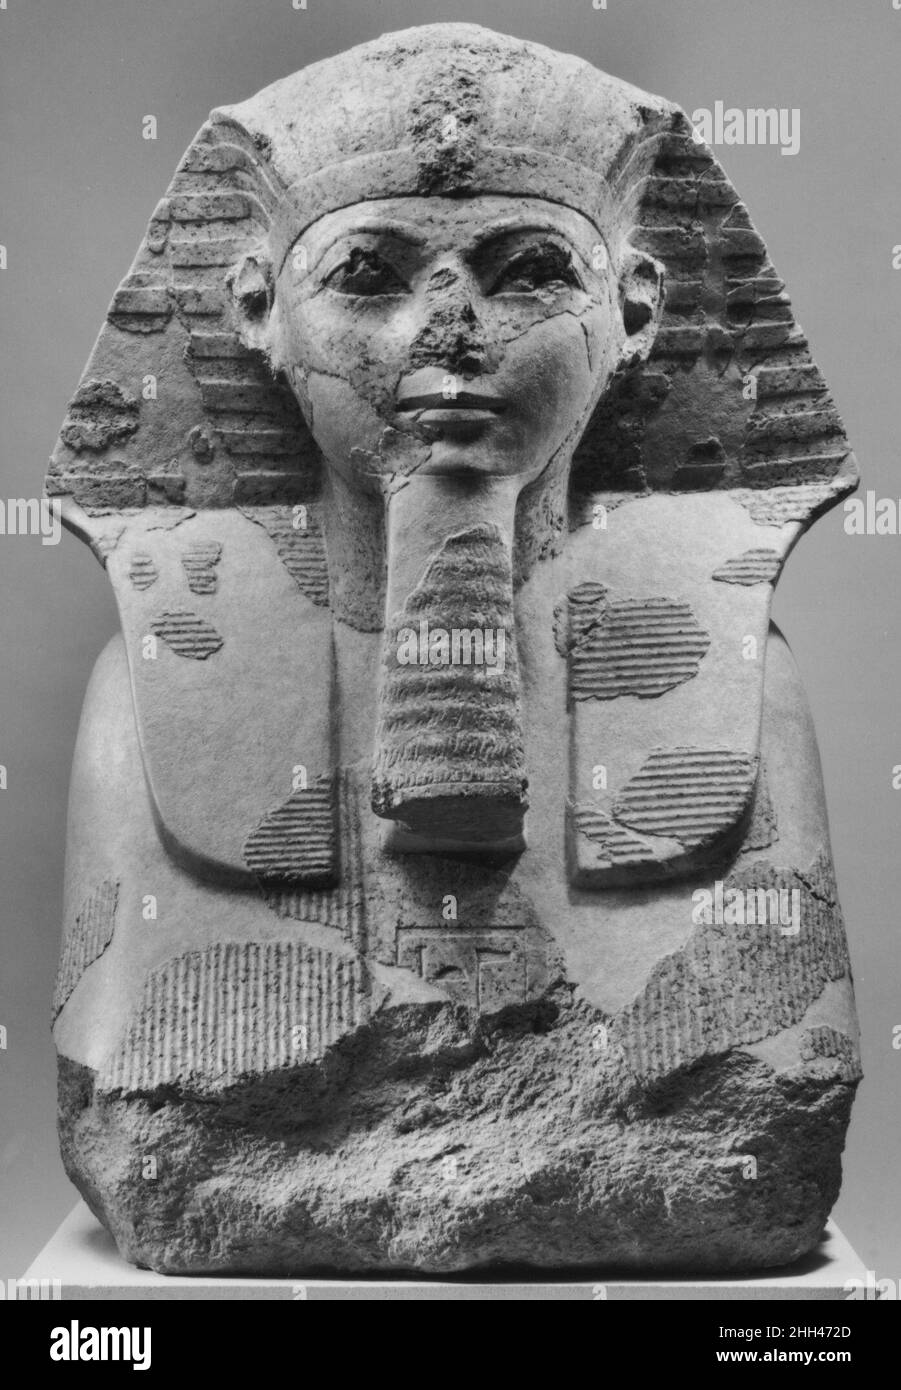 Head and Shoulders of a Sphinx of Hatshepsut ca. 1479–1458 B.C. New Kingdom This fragmentary sphinx represents the female pharaoh Hatshepsut. Portions of six granite sphinxes were discovered during the Museum's excavations in the area of Hatshepsut's mortuary temple at Deir el-Bahri in Western Thebes. A nearly complete example (31.3.166) is on display in gallery 131. This sphinx still retains substantial blue paint on the royal beard, traces of yellow paint on the pleats of the nemes-headcloth, and small amounts of paint around the eyes.A smaller sphinx in a different style is also owned by th Stock Photo